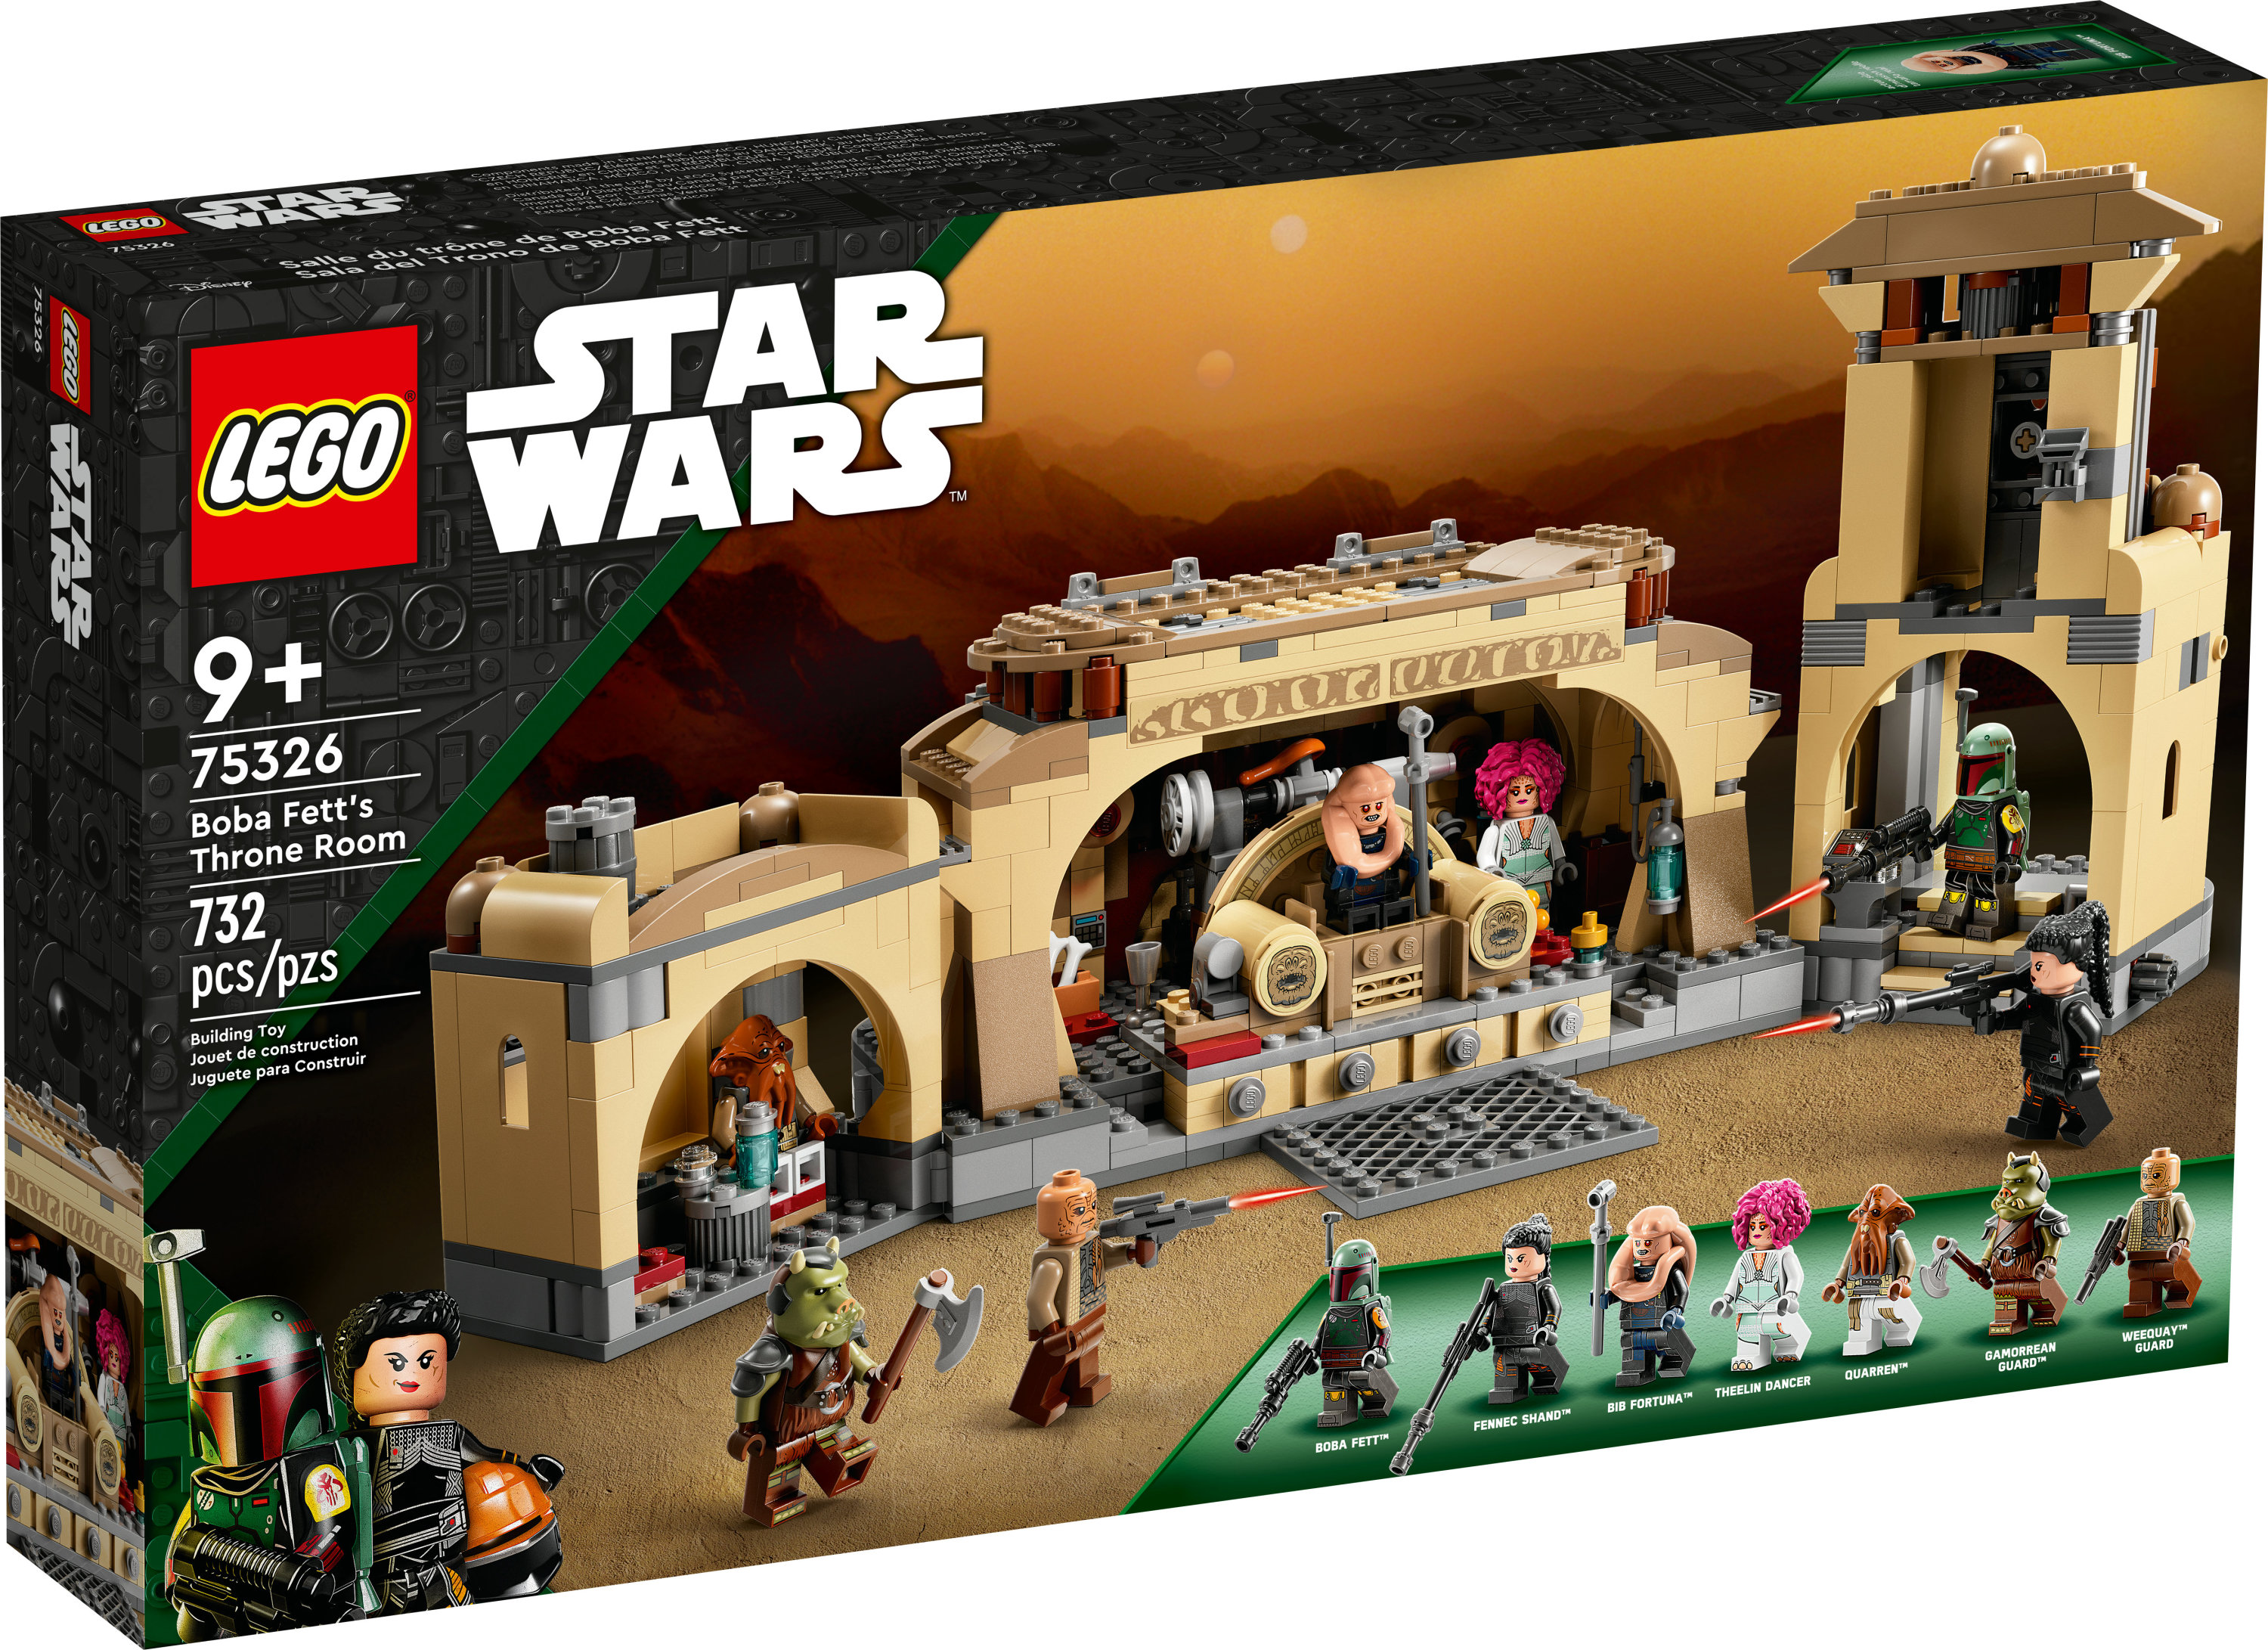 LEGO Star Wars Boba Fett’s Throne Room Building Kit 75326, with Jabba The Hutt Palace and 7 Minifigures, Star Wars Building Set, Great Gift For Star Wars Fans, Boys, Girls, Kids Age 7+ Years Old - image 3 of 8